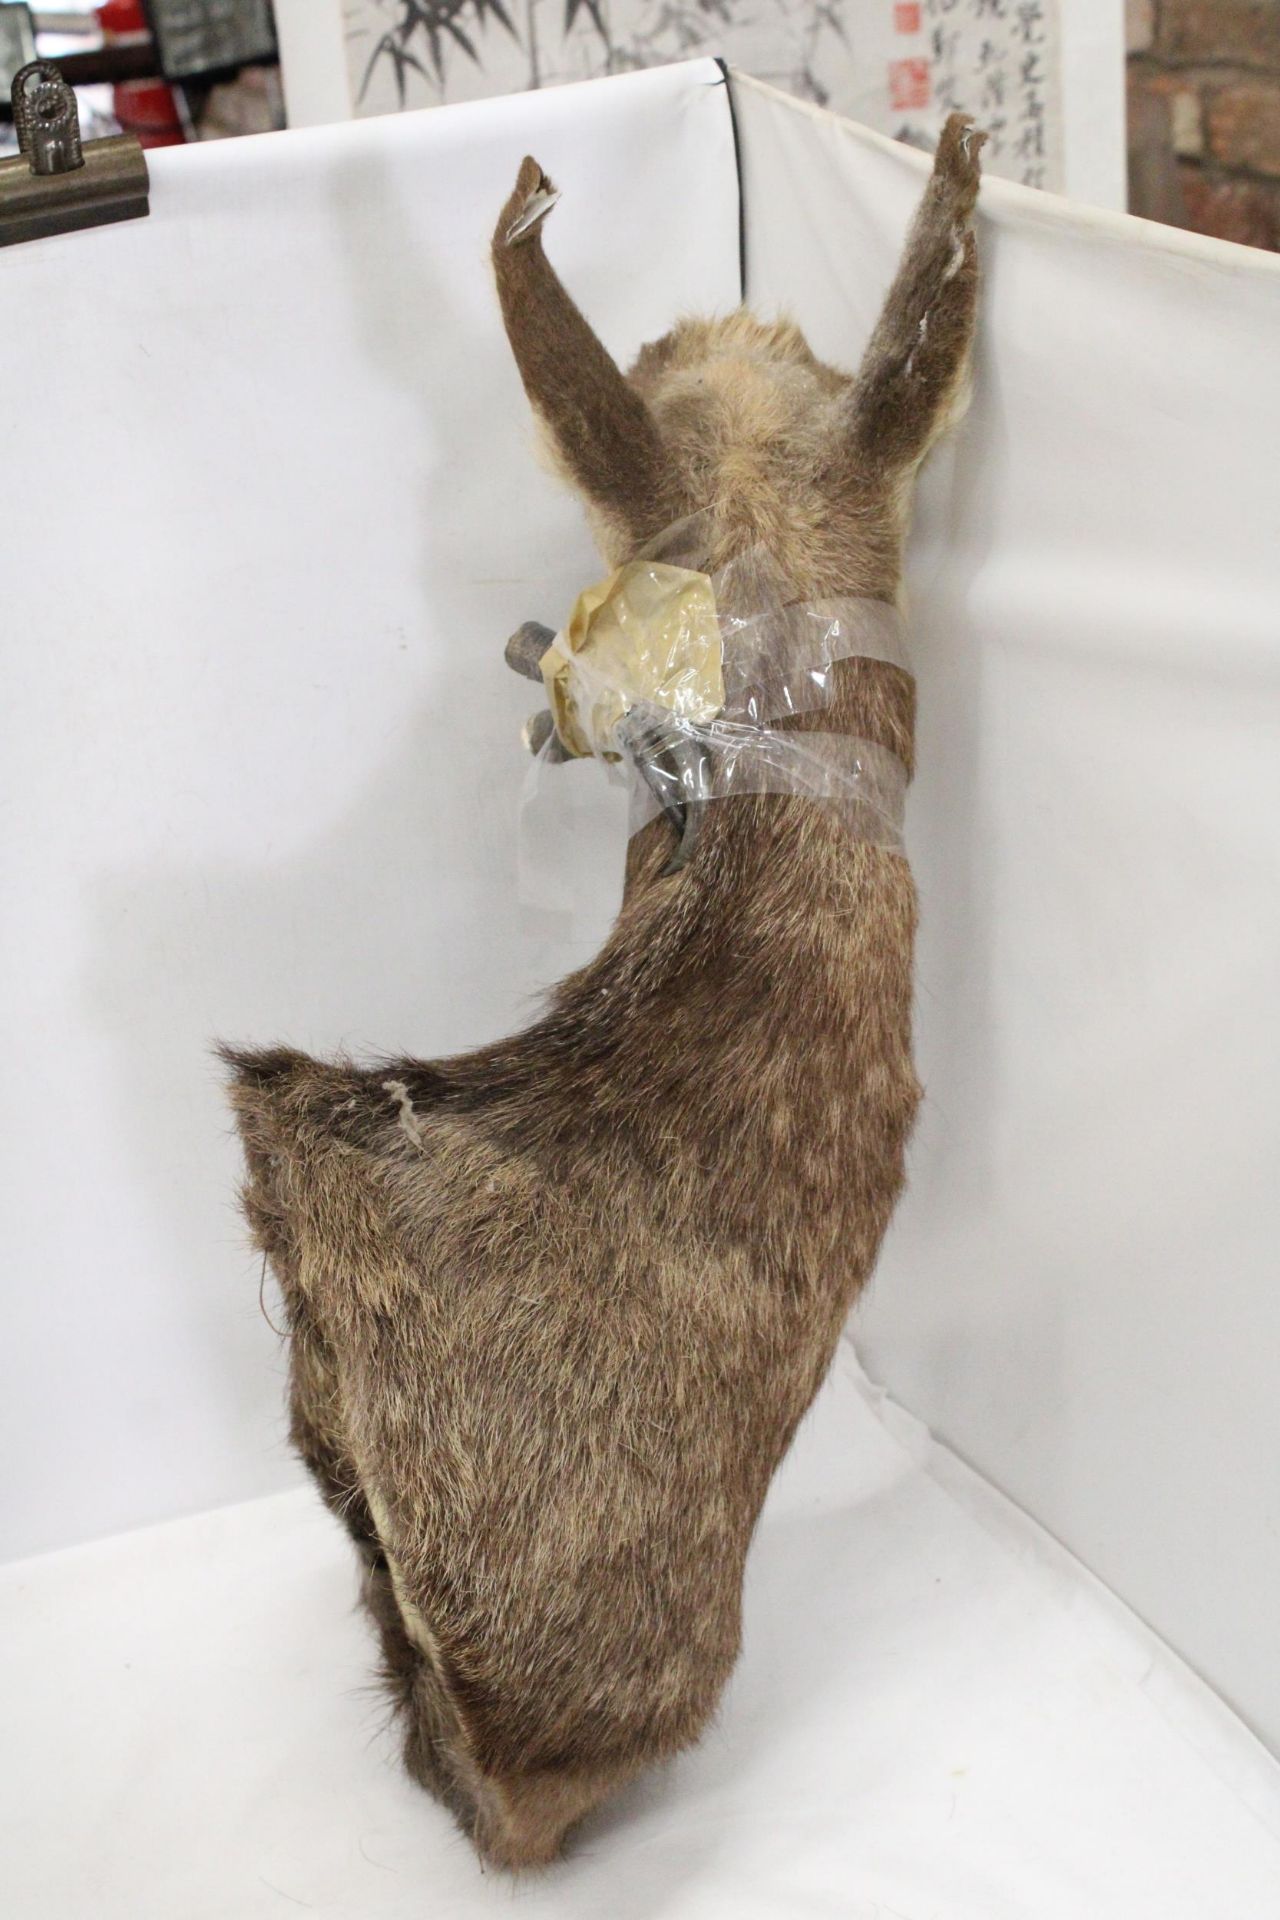 A TAXIDERMY OF A DEER WITH HORNS - Image 2 of 6